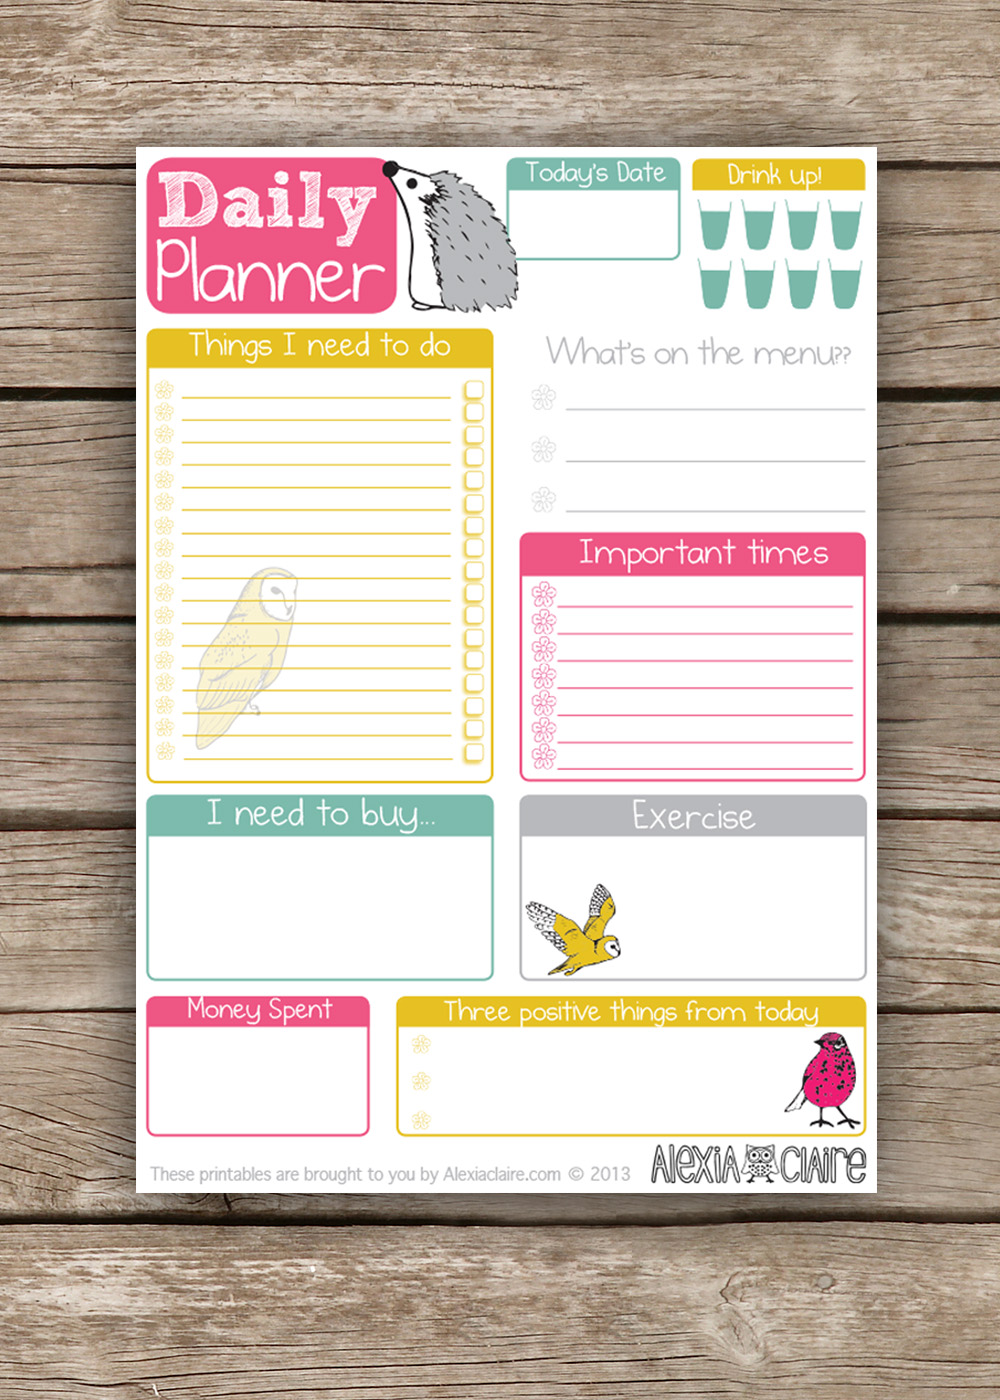 5-best-images-of-stylish-2014-planners-printable-weekly-stylish-printable-weekly-planners-2014